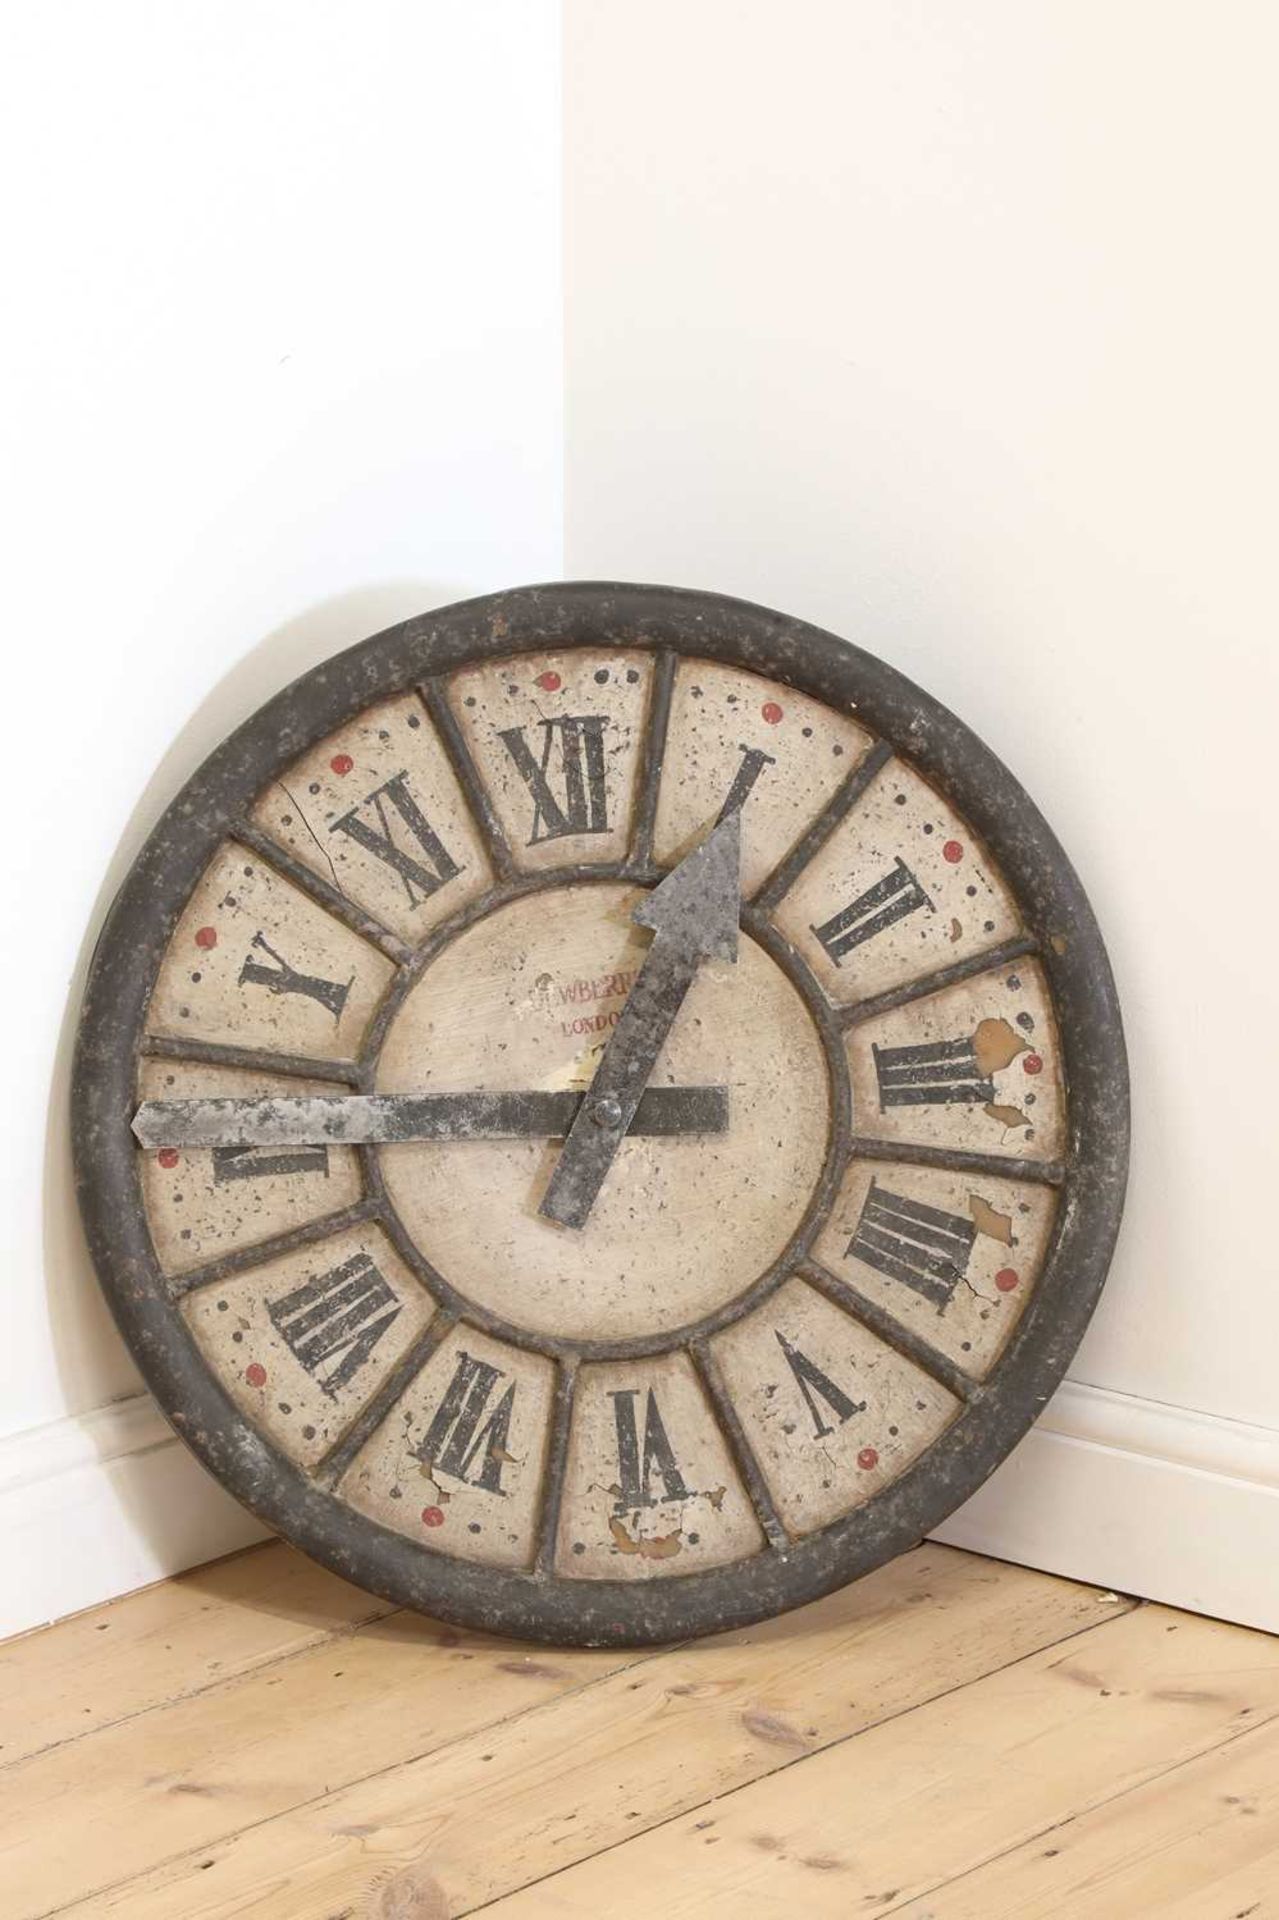 A painted wooden clock face,